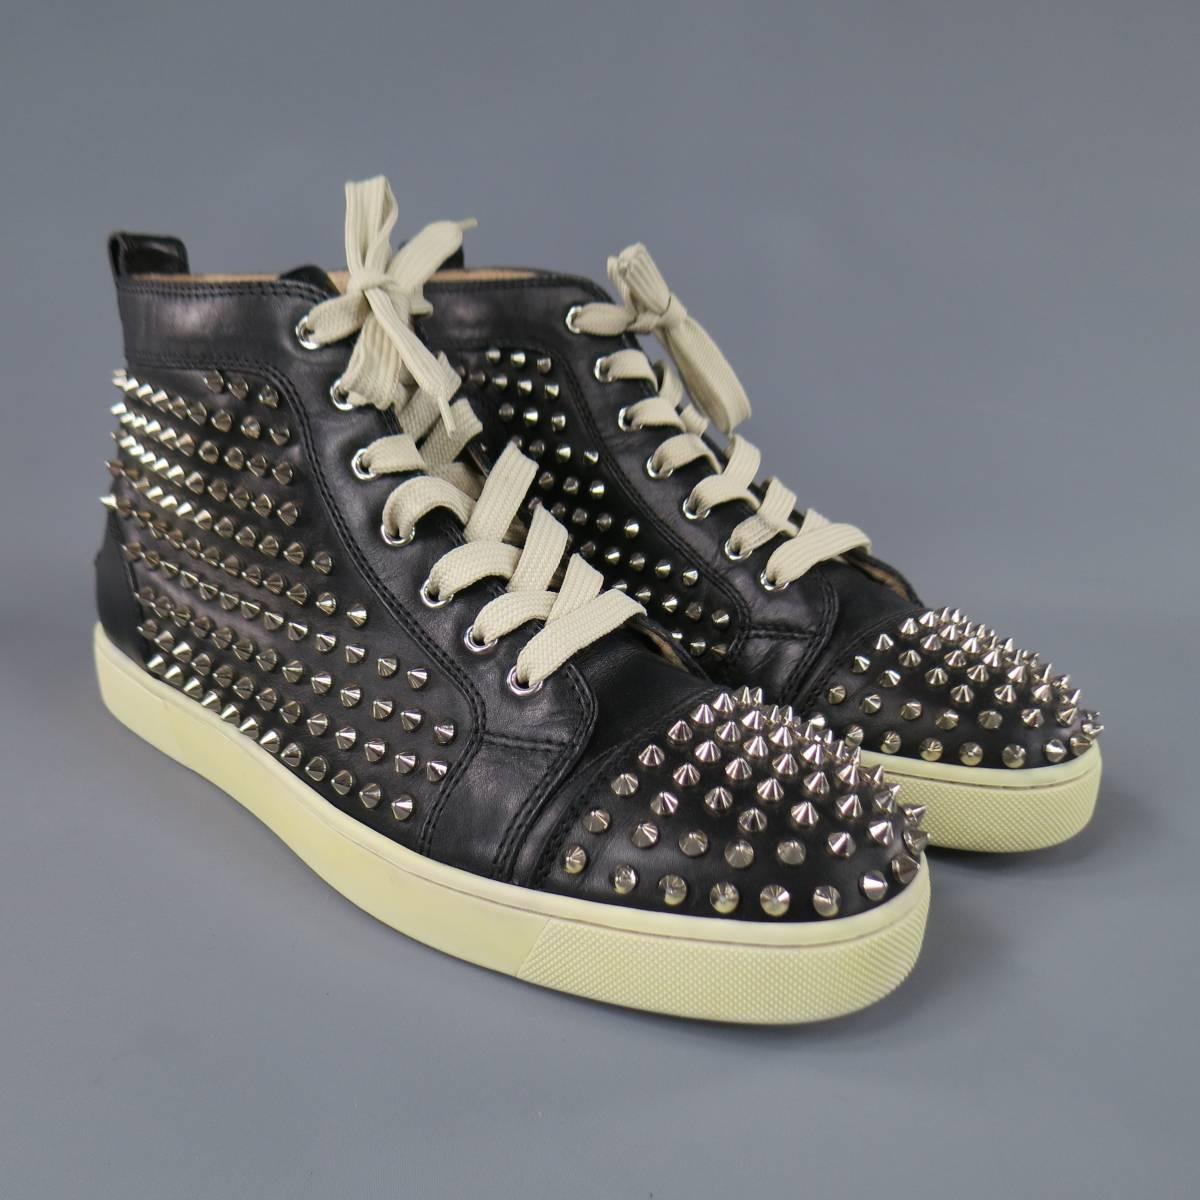 cruise studded hi top sneakers